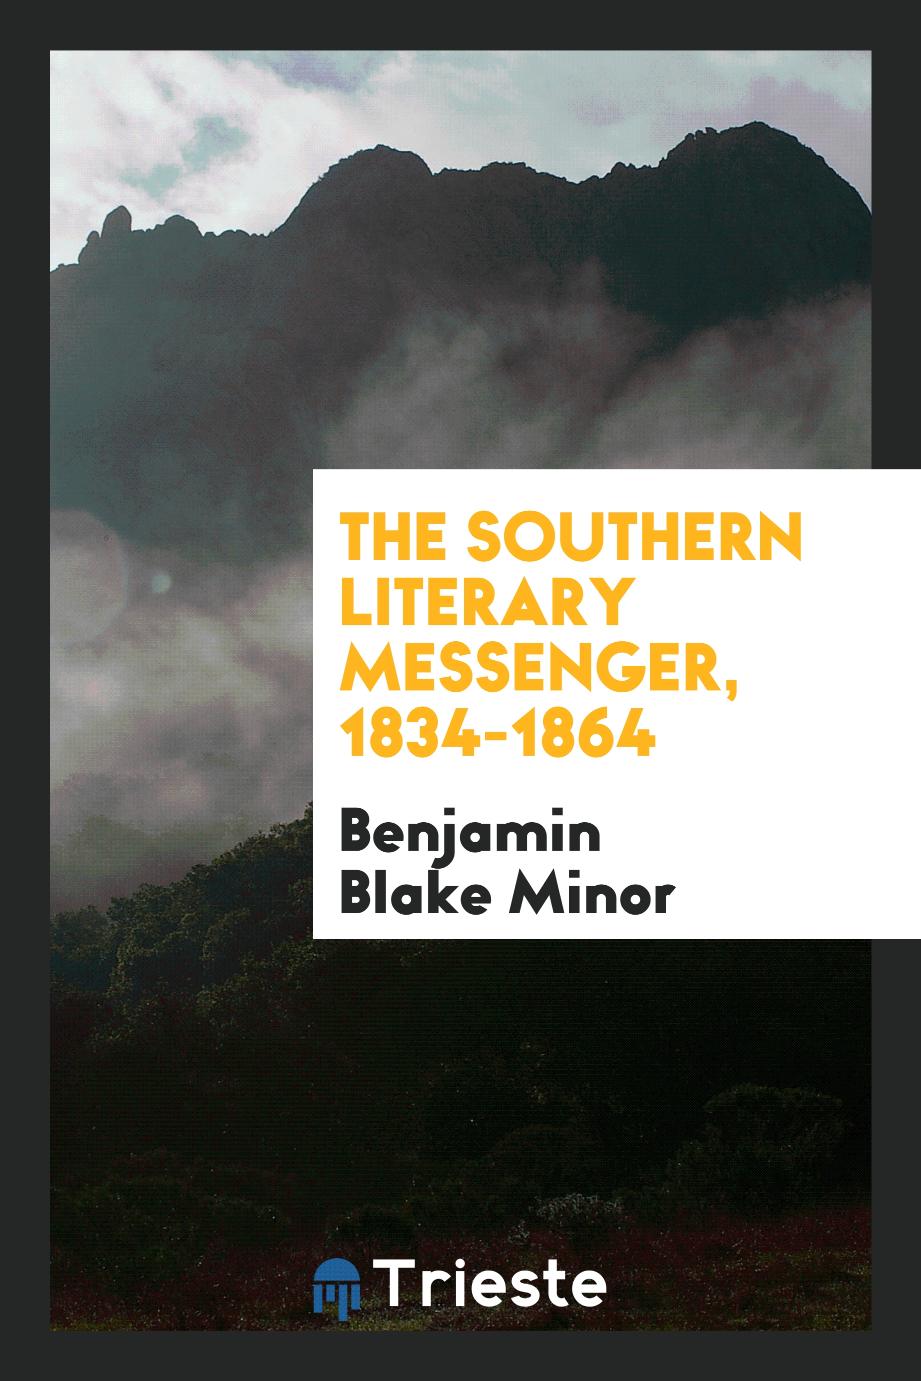 The Southern literary messenger, 1834-1864